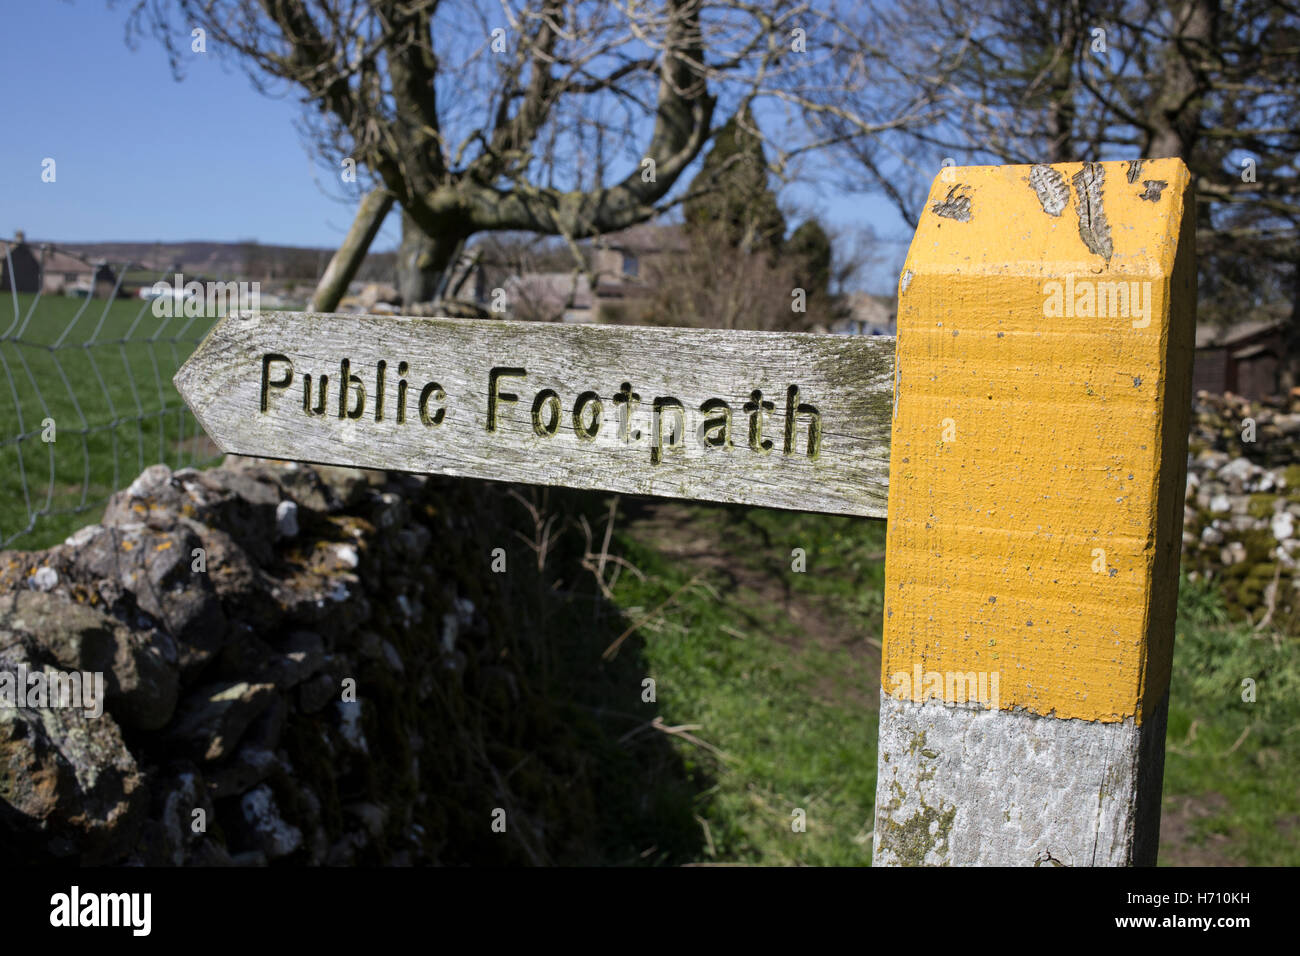 Gates and Footpaths in Coverdale, Yorkshire Dales Public Footpath sign Stock Photo